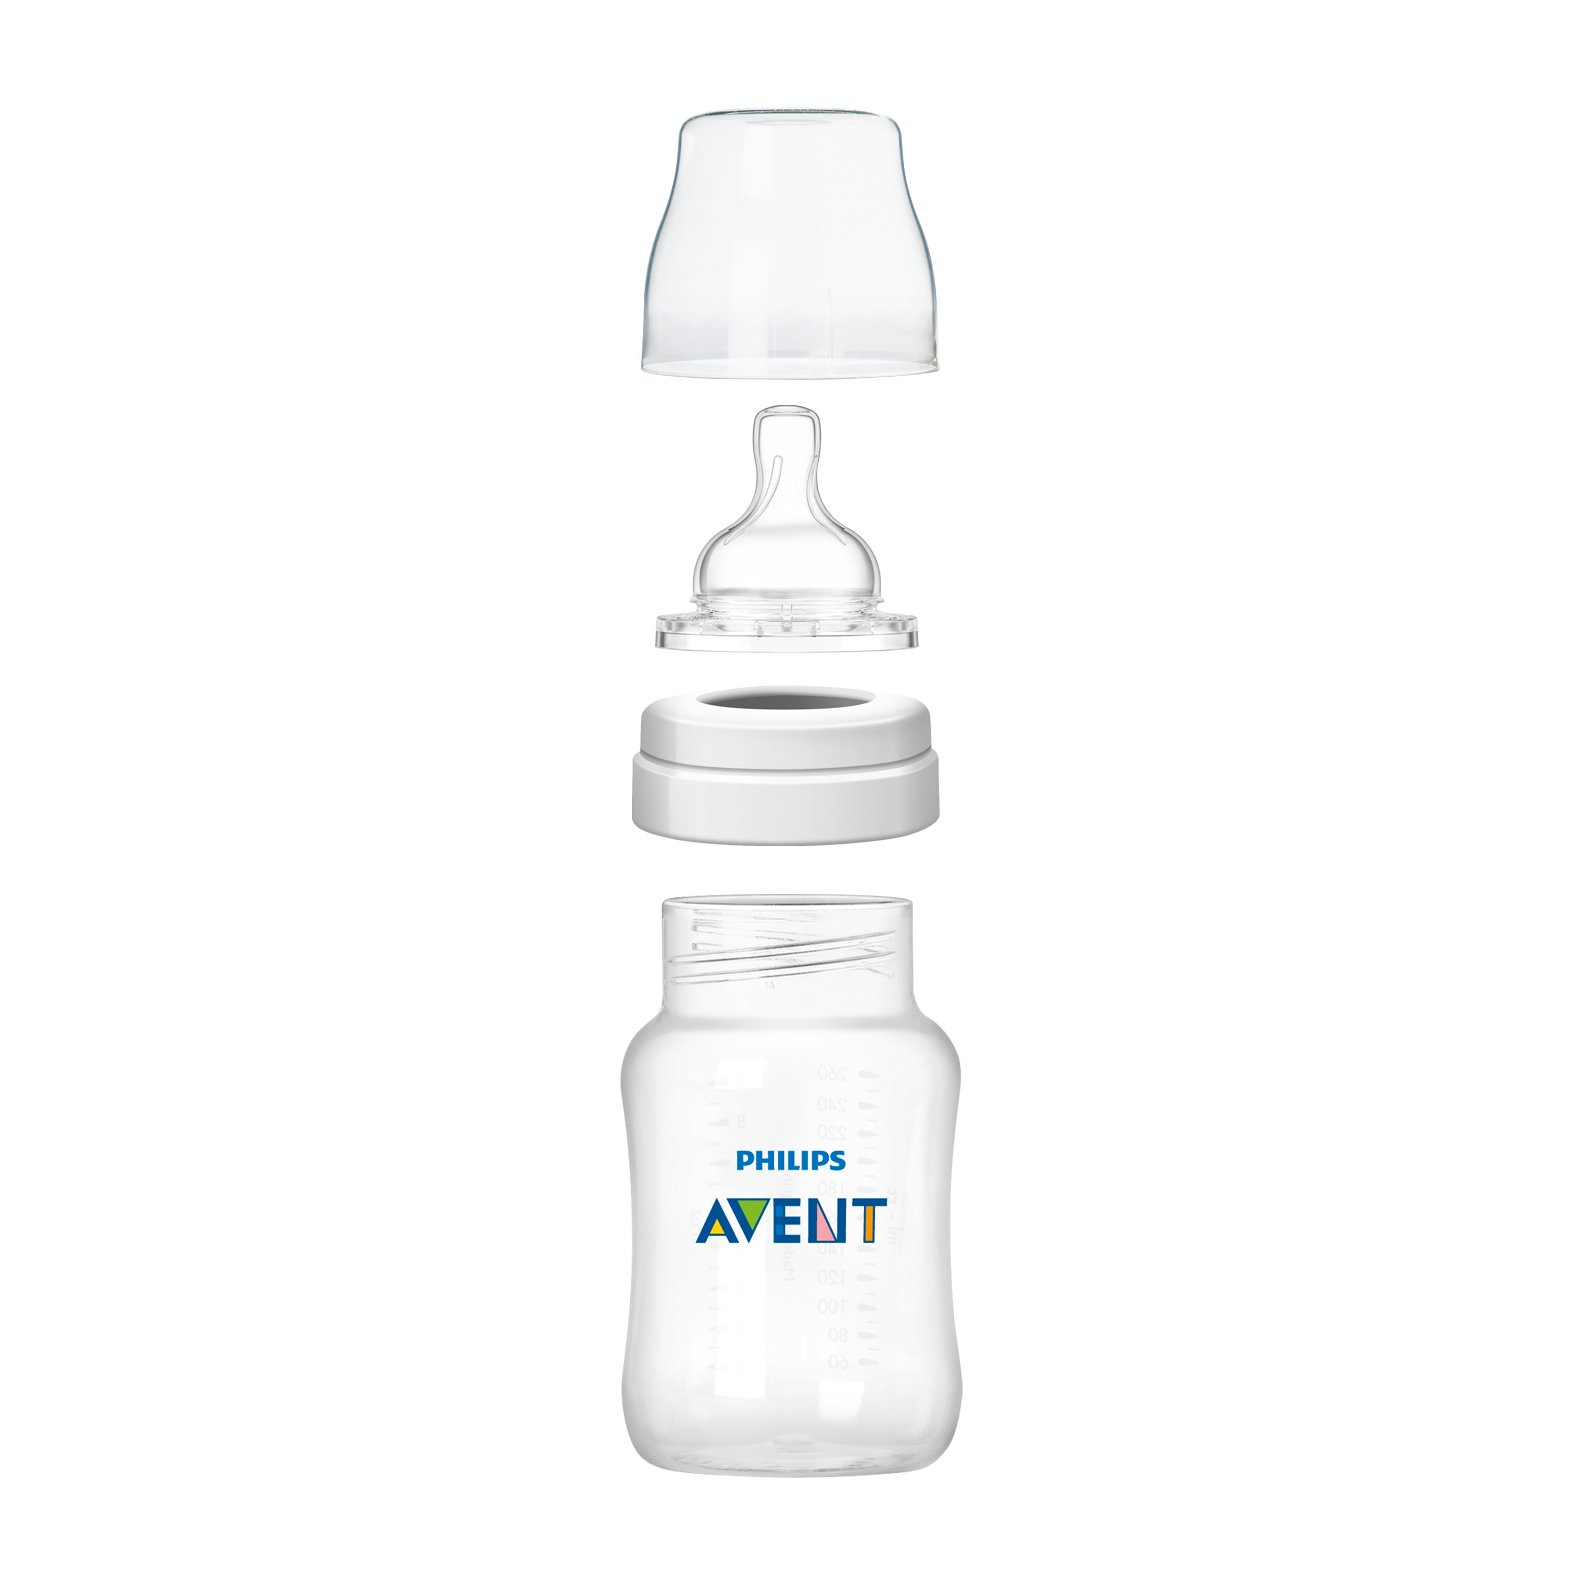 Philips Avent Anti-Colic BPA-Free Baby Bottles - 9oz, Clear, 3 ct - image 2 of 9